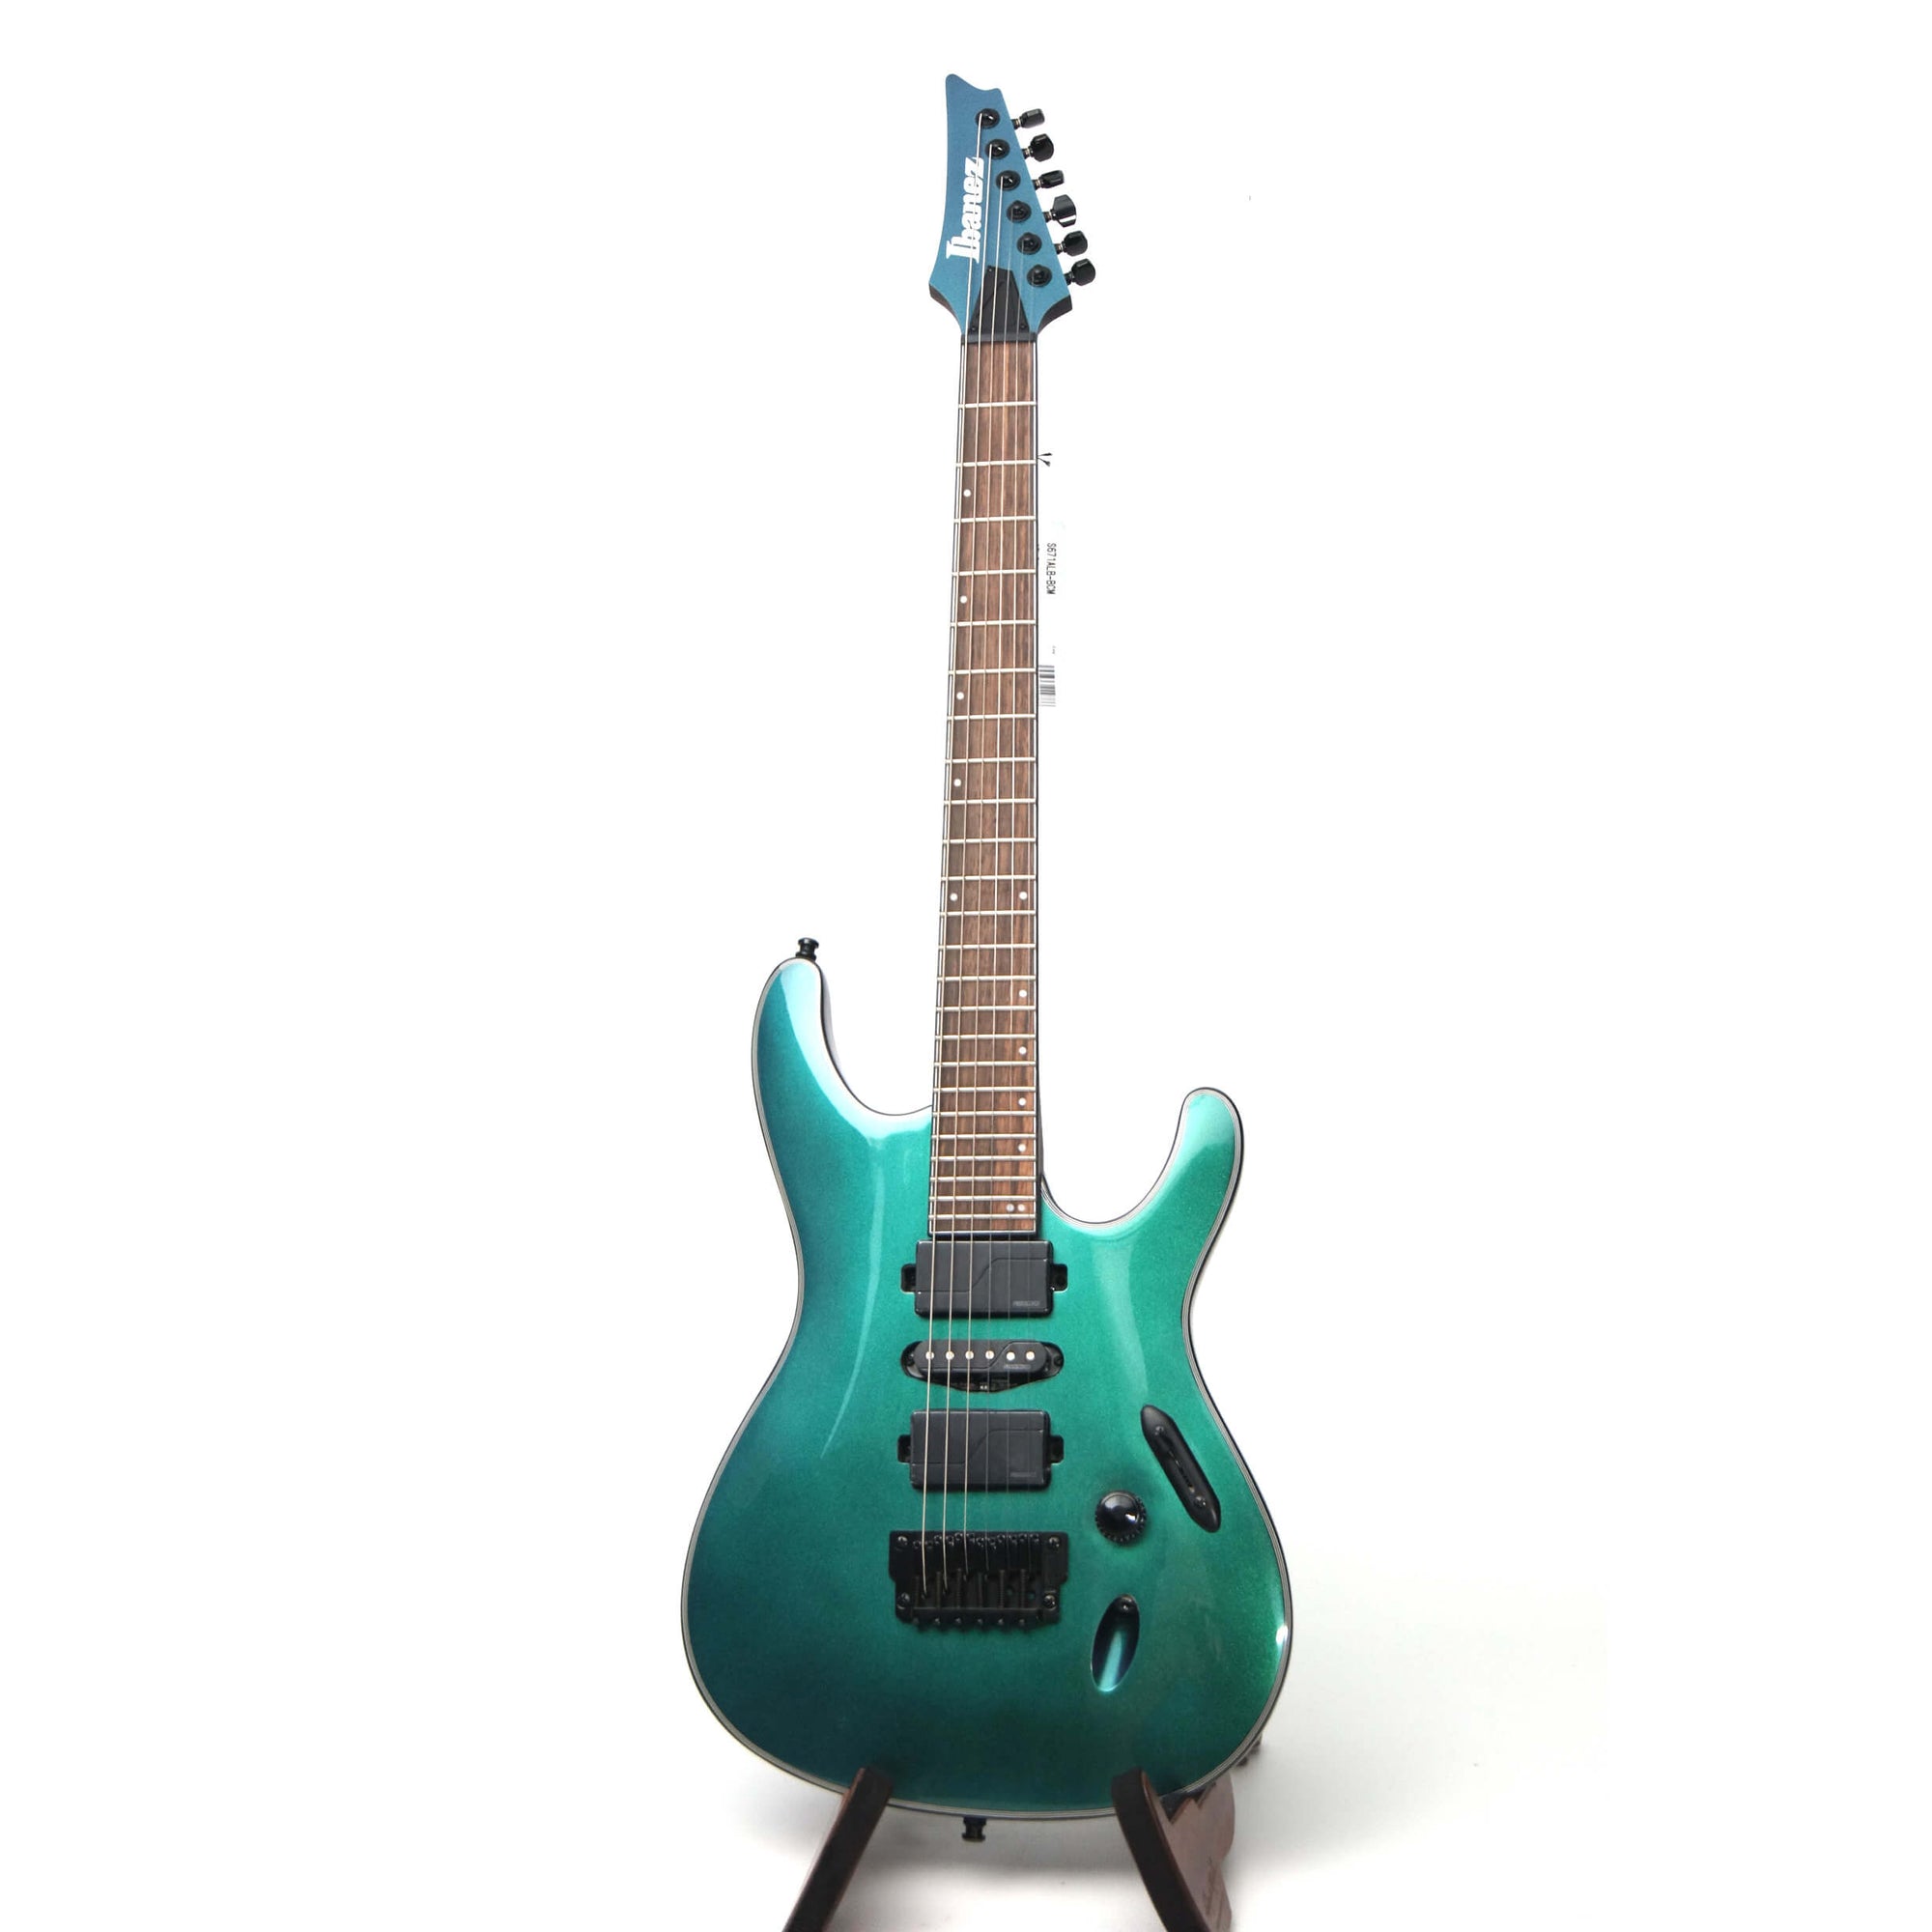 Ibanez S671ALBBCM Axion Label 6-String Electric Blue Chameleon Guitar-front full